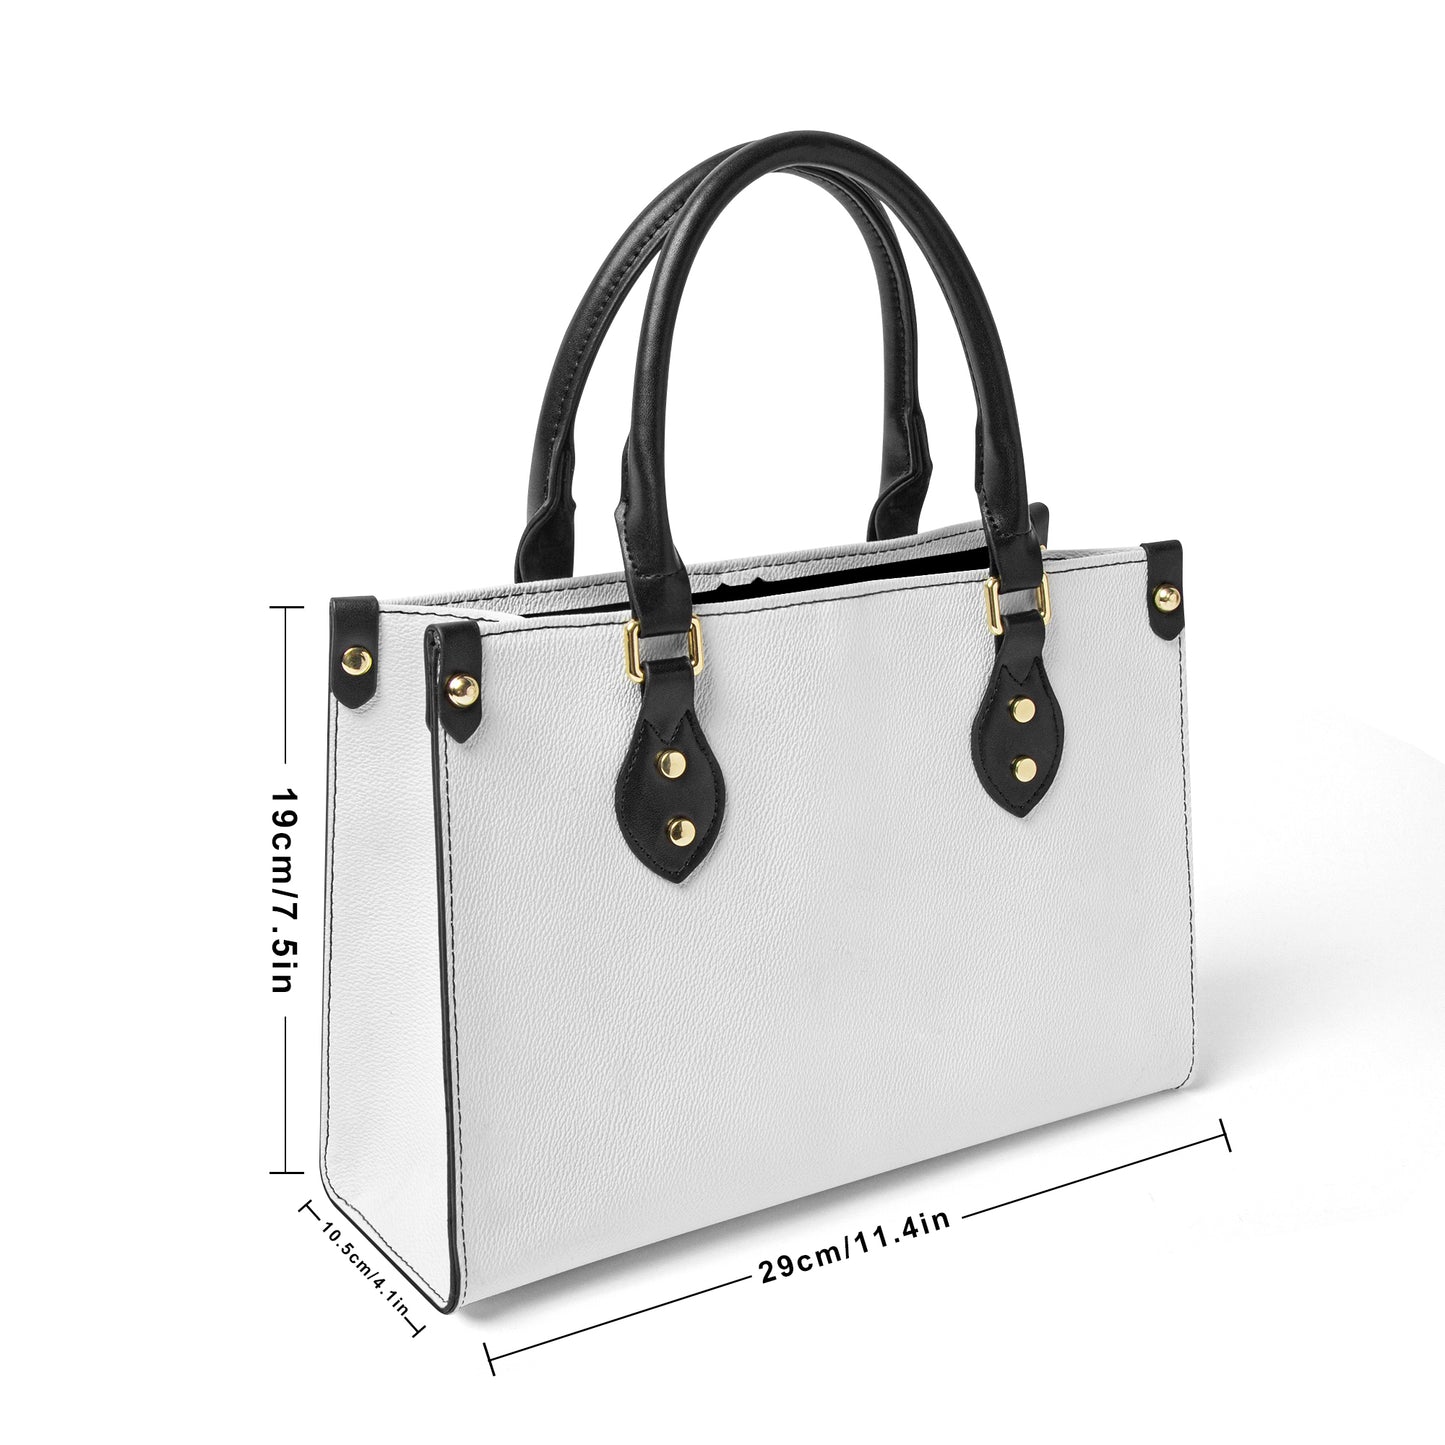 Women's "OUPE" Tote Bag With Black Handle RETRO